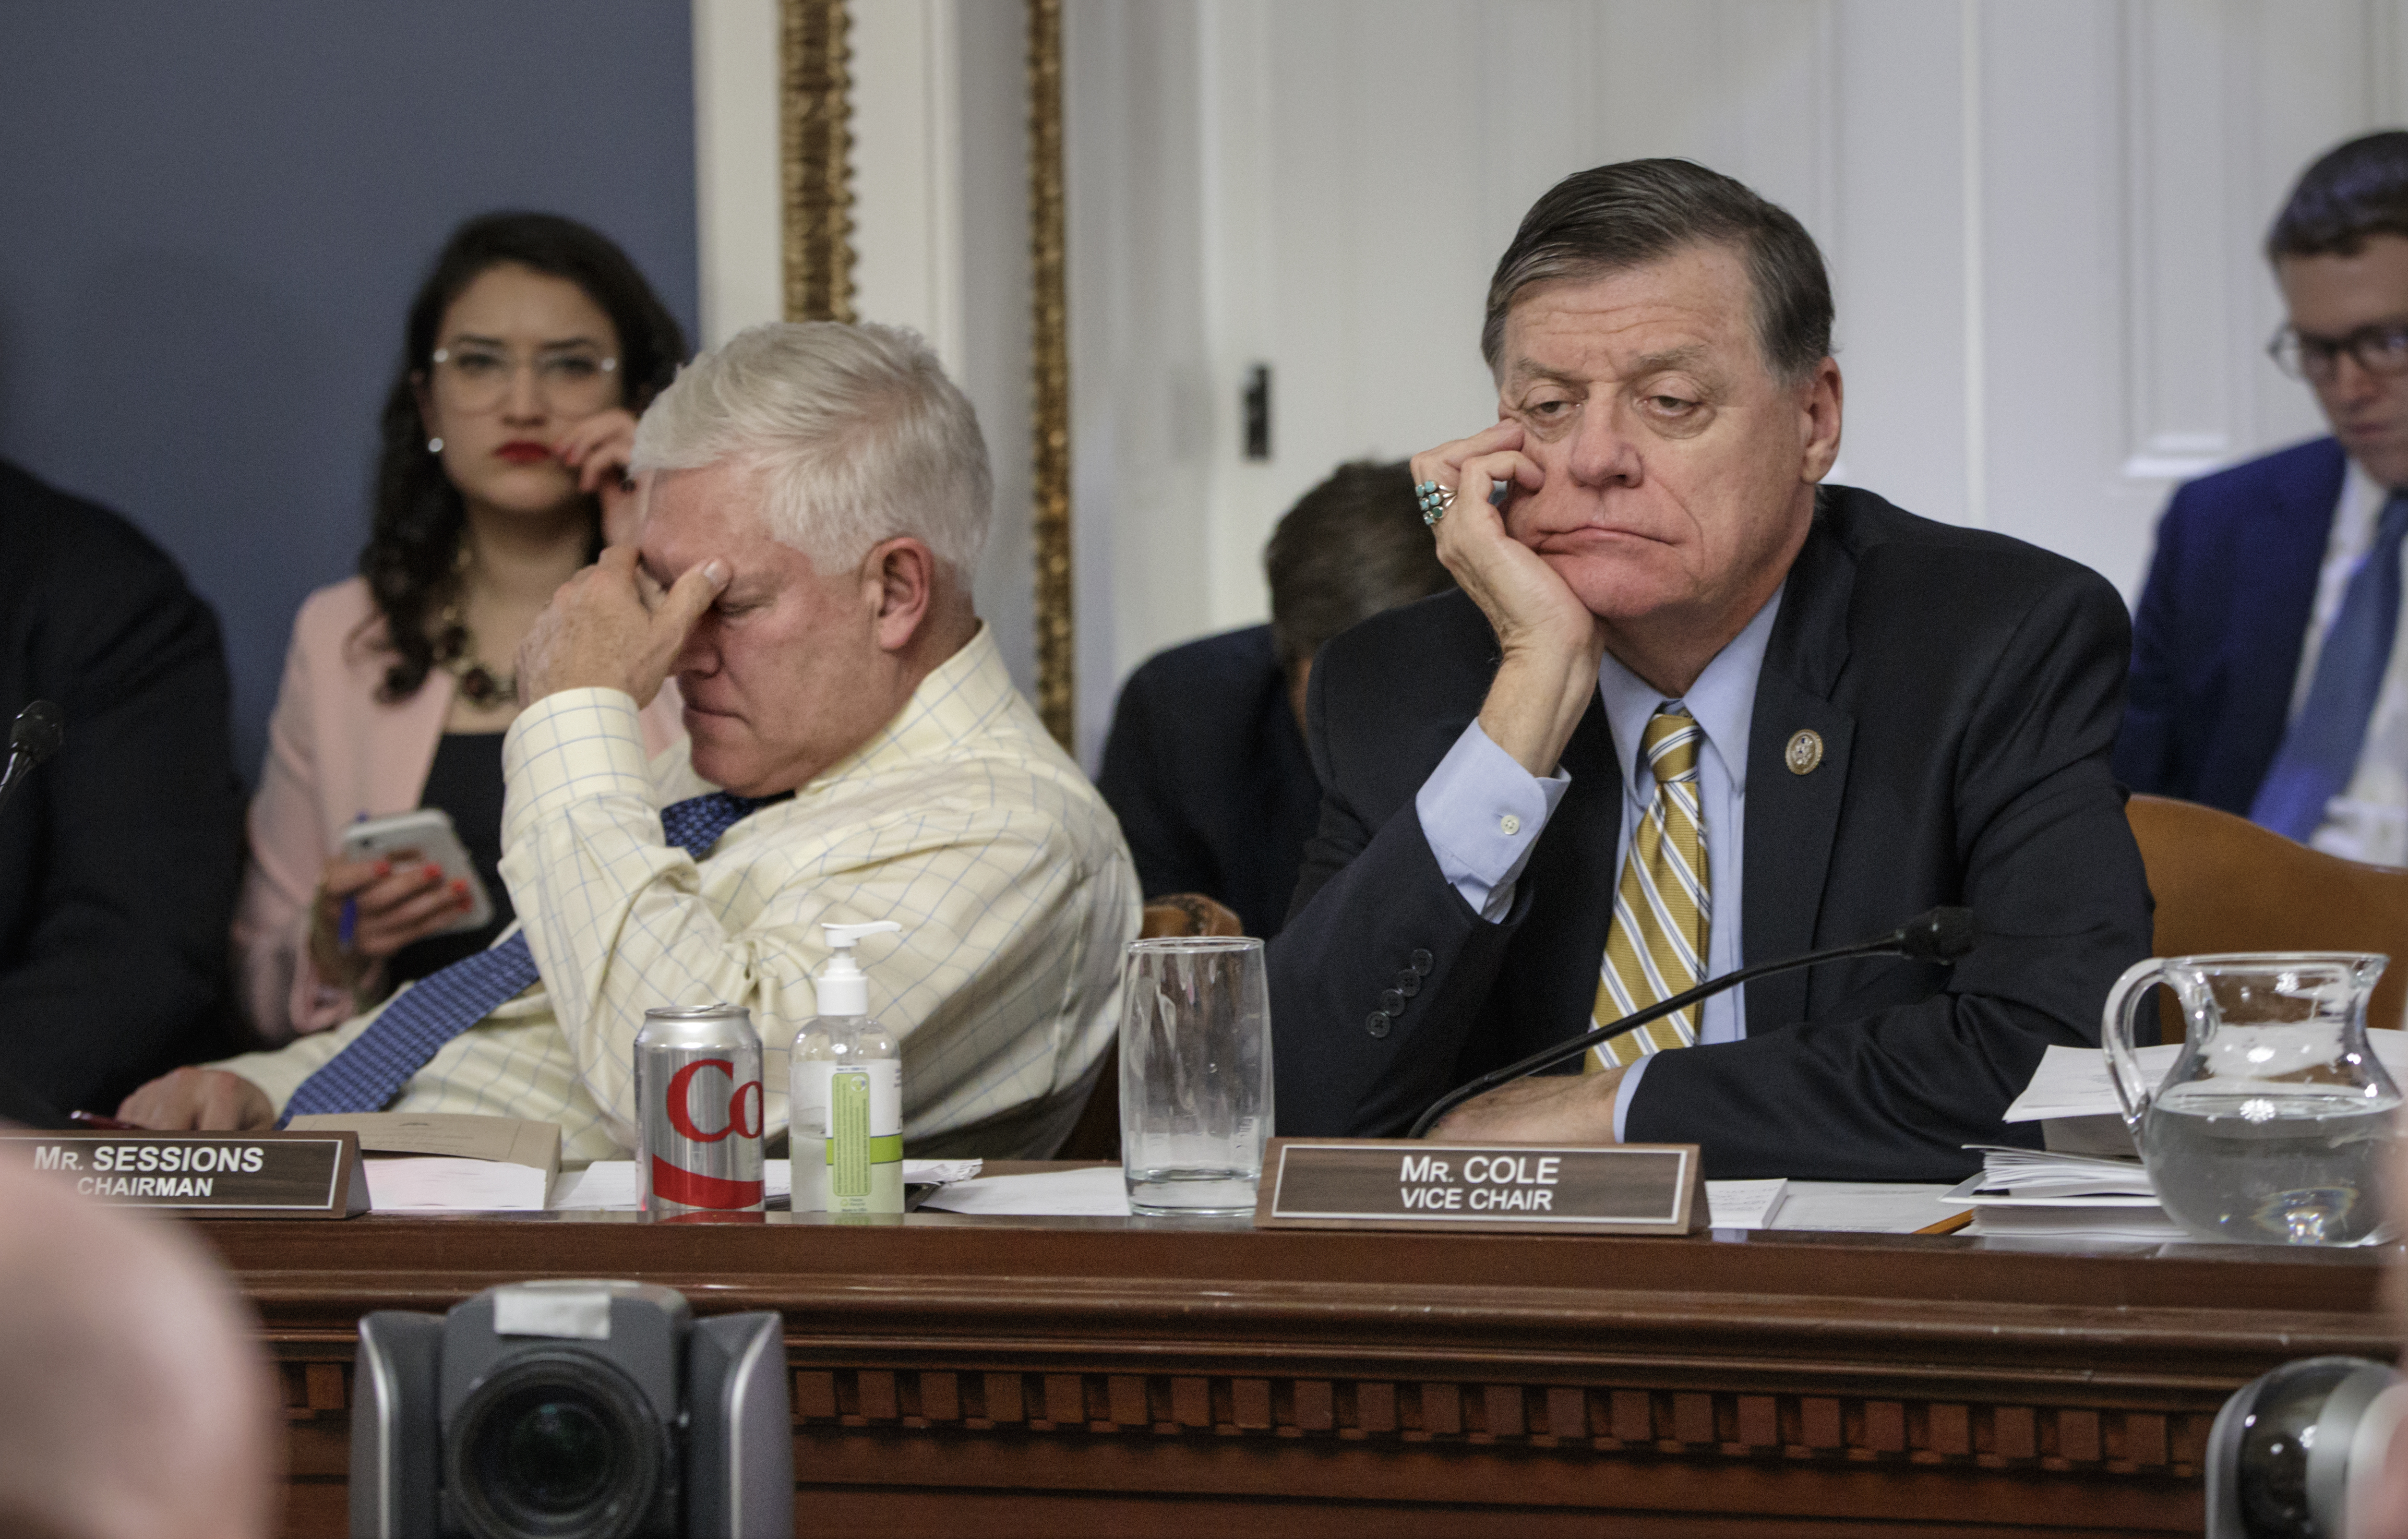 After eight hours of debate, House Rules Committee Chairman Rep. Pete Sessions, R-Texas, left, and Rep. Tom Cole, R-Okla., the vice-chair, listen to arguments from committee chairs as the panel meets to shape the final version of the Republican health care bill before it goes to the floor for debate and a vote, Wednesday, March 22, 2017, on Capitol Hill in Washington. Photo: J. Scott Applewhite | Associated Press.